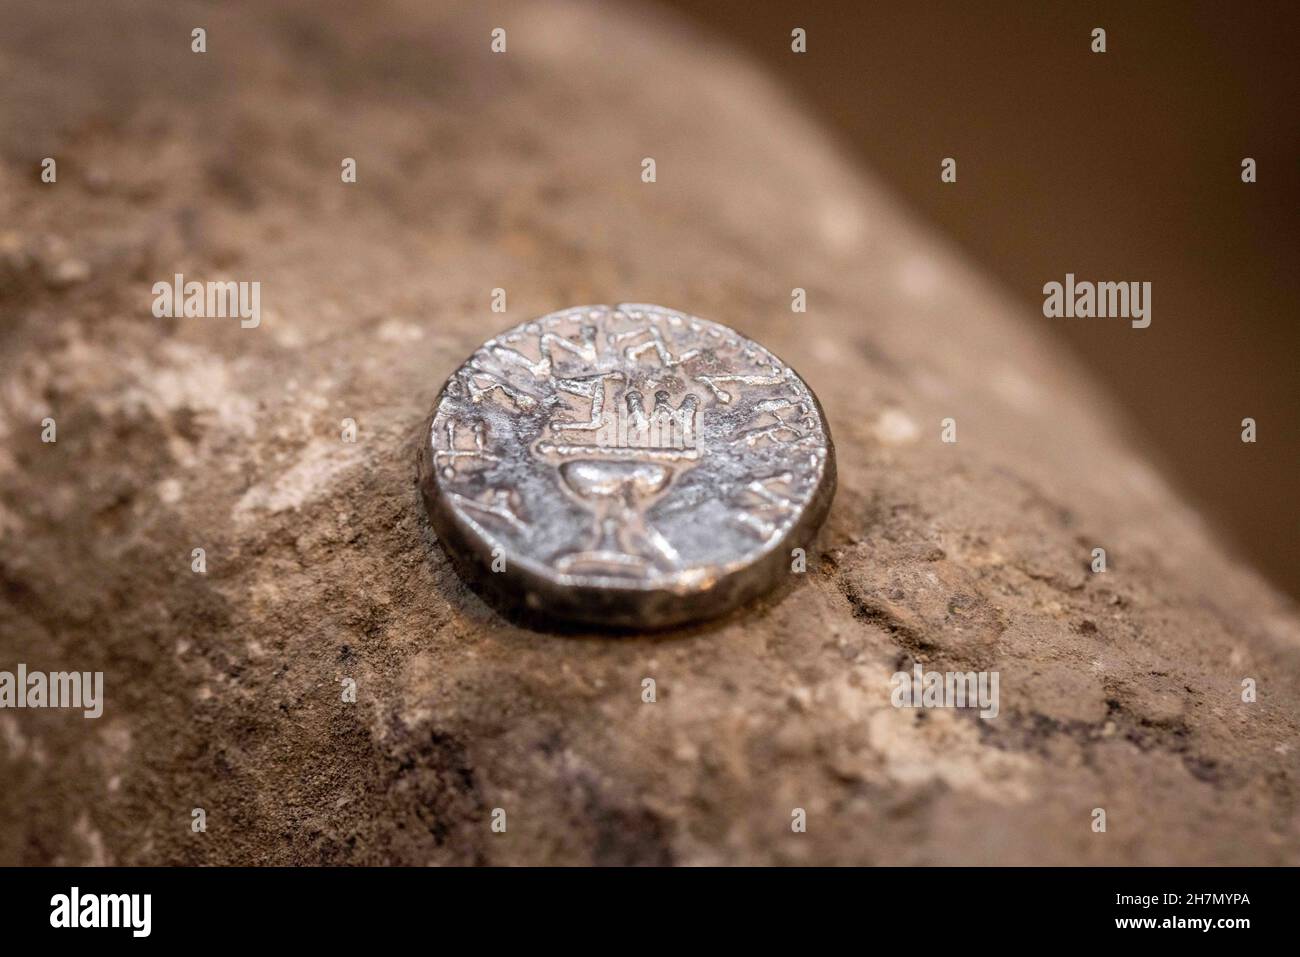 (211124) -- JERUSALEM, Nov. 24, 2021 (Xinhua) -- Photo taken on Nov. 23, 2021 shows the ancient silver coin dating back to about 2,000 years ago in Jerusalem. An ancient shekel, dating back to about 2,000 years ago, was discovered in Jerusalem, the Israel Antiquities Authority (IAA) said on Tuesday. The shekel, which weighs about 14 grams, was probably minted by one priest of the Jewish Second Temple, shortly before the destruction of the temple. (JINI via Xinhua) Stock Photo